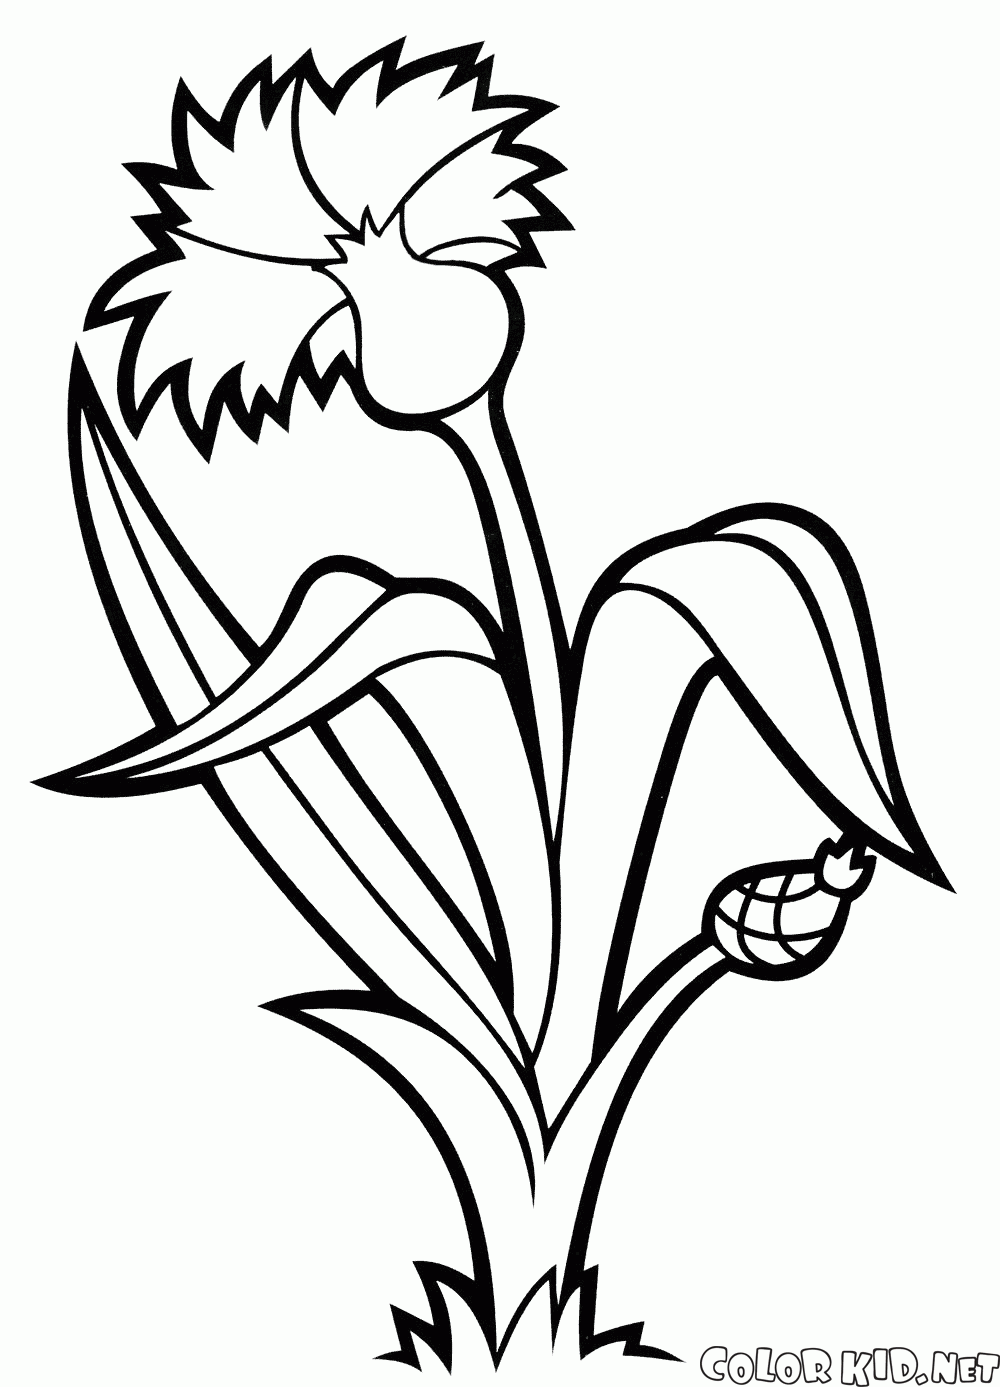 Coloring page - Lily